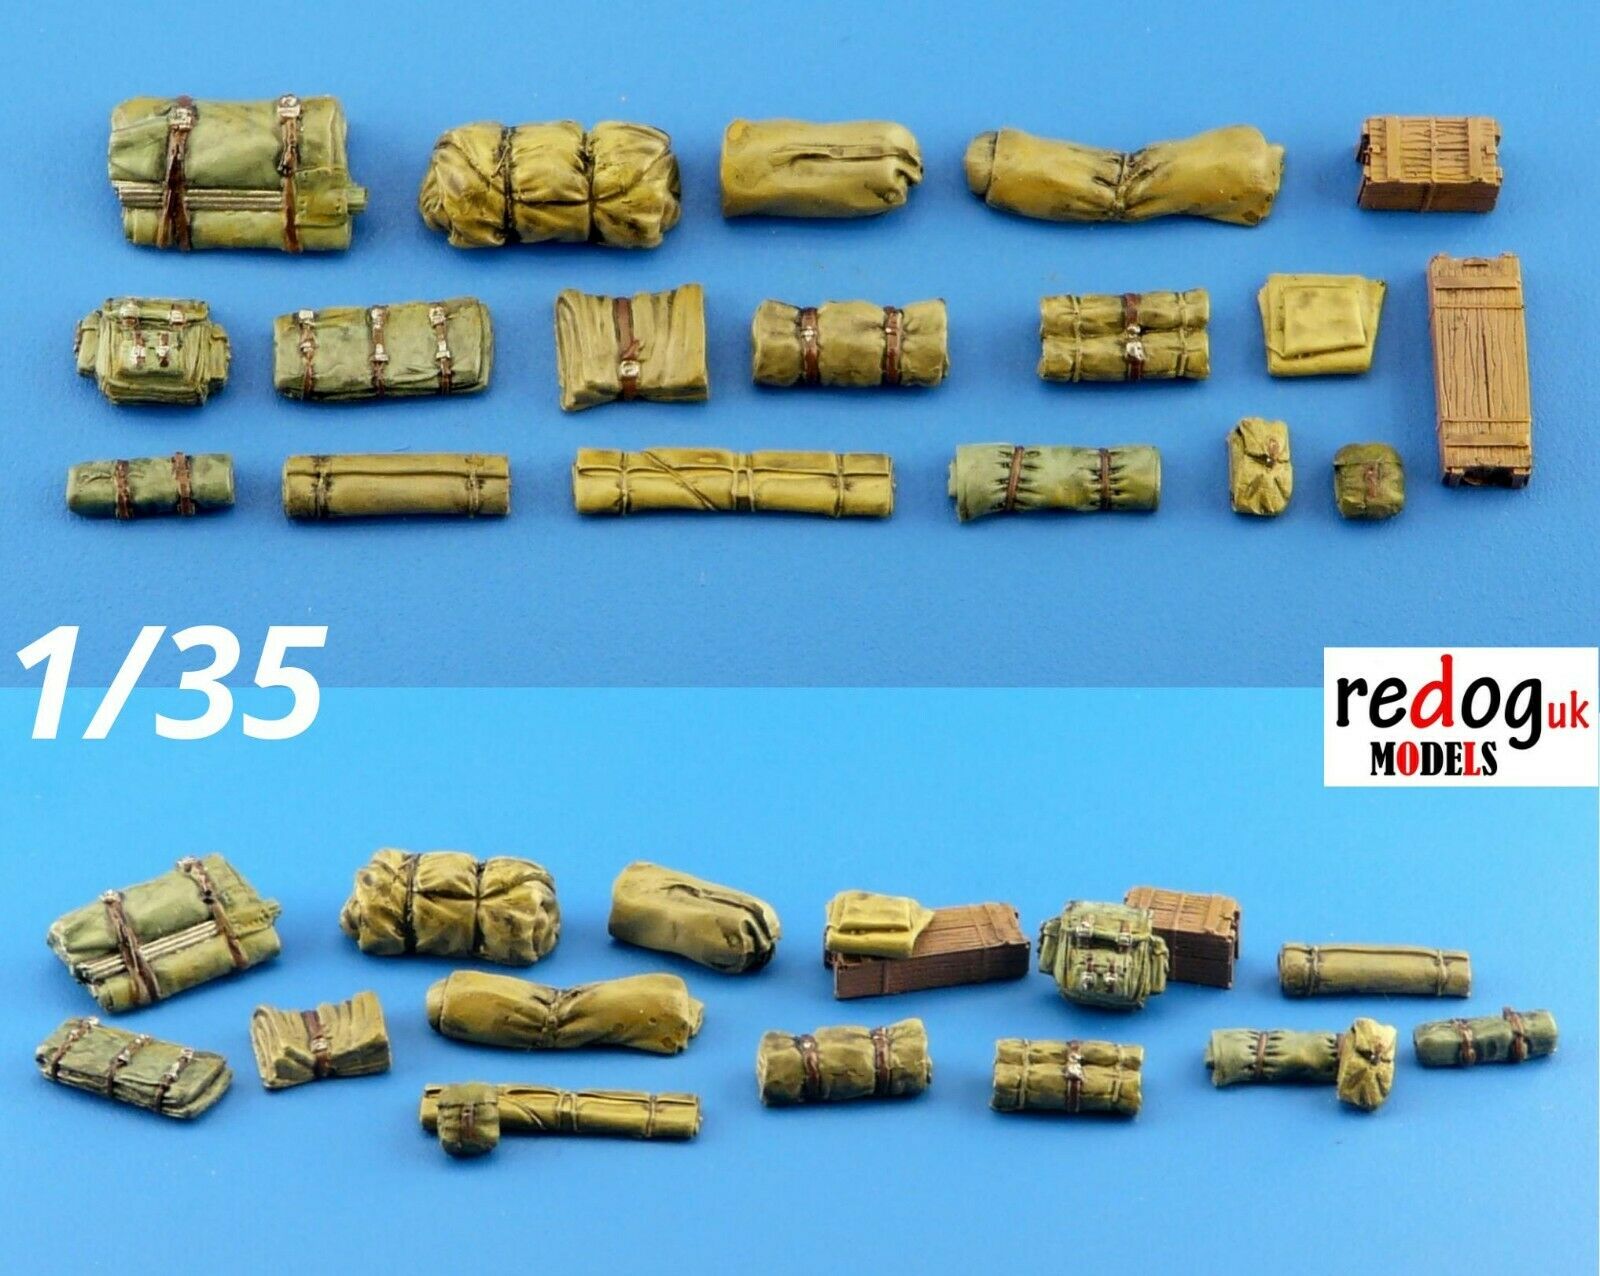 1/35 Military Scale Modelling Resin Stowage Kit Diorama Accessories Kit 2 - redoguk